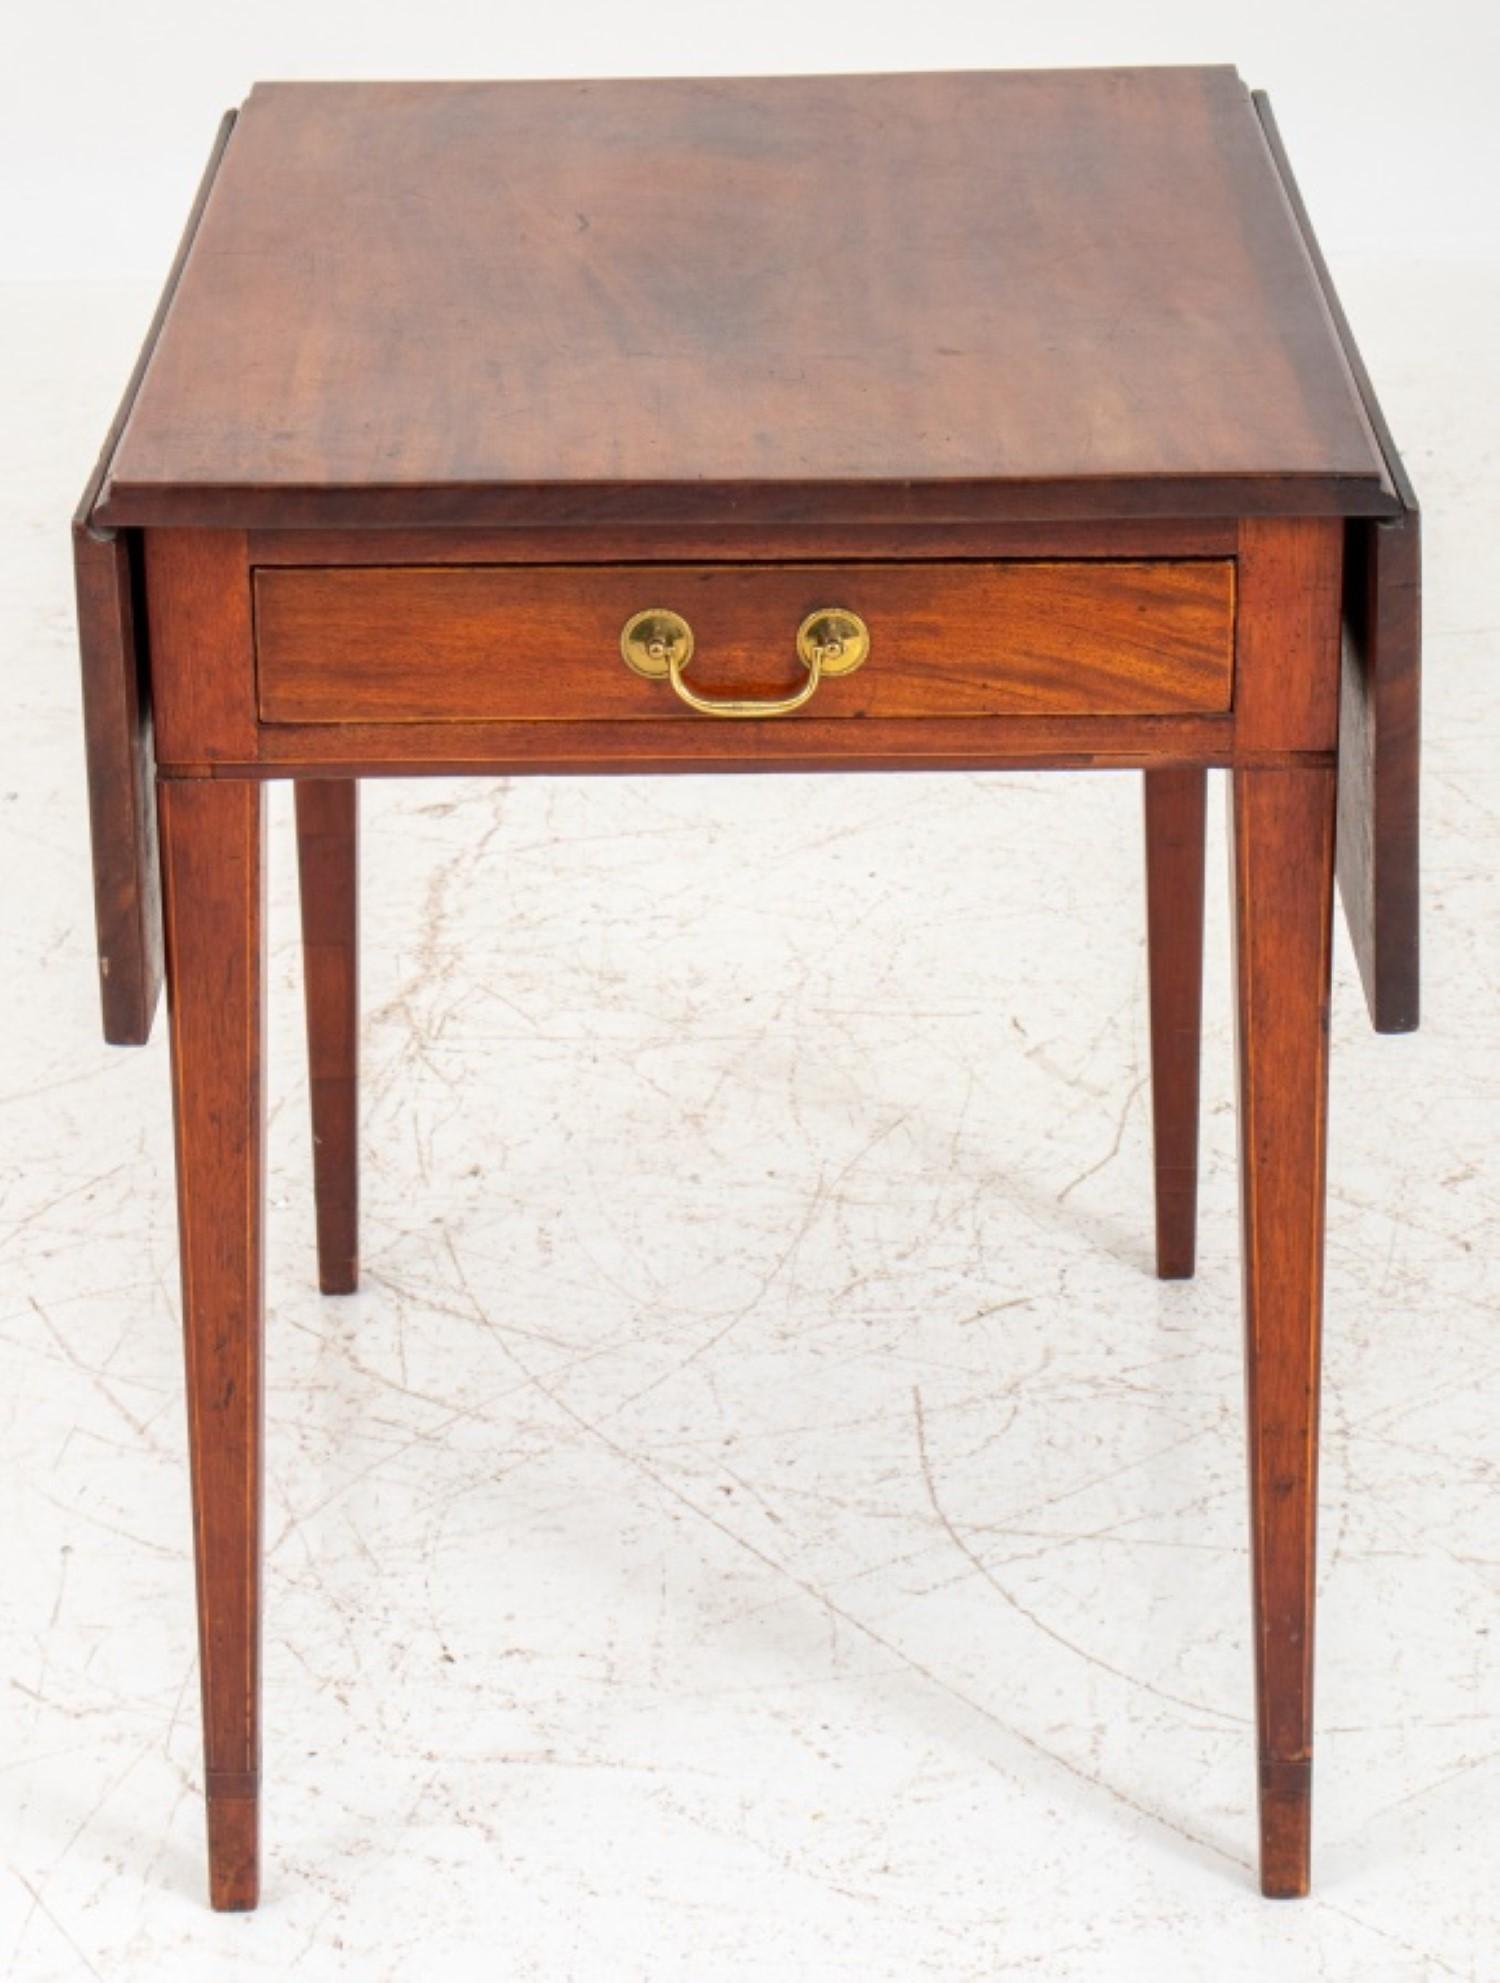 George III Mahogany Pembroke Table, rectangular with two drop sides and a short drawer at one end, the legs with satinwood stringing.

28.5 inches in height, 23 inches in width (41 inches when the drop sides are up), and 30.5 inches in depth.
